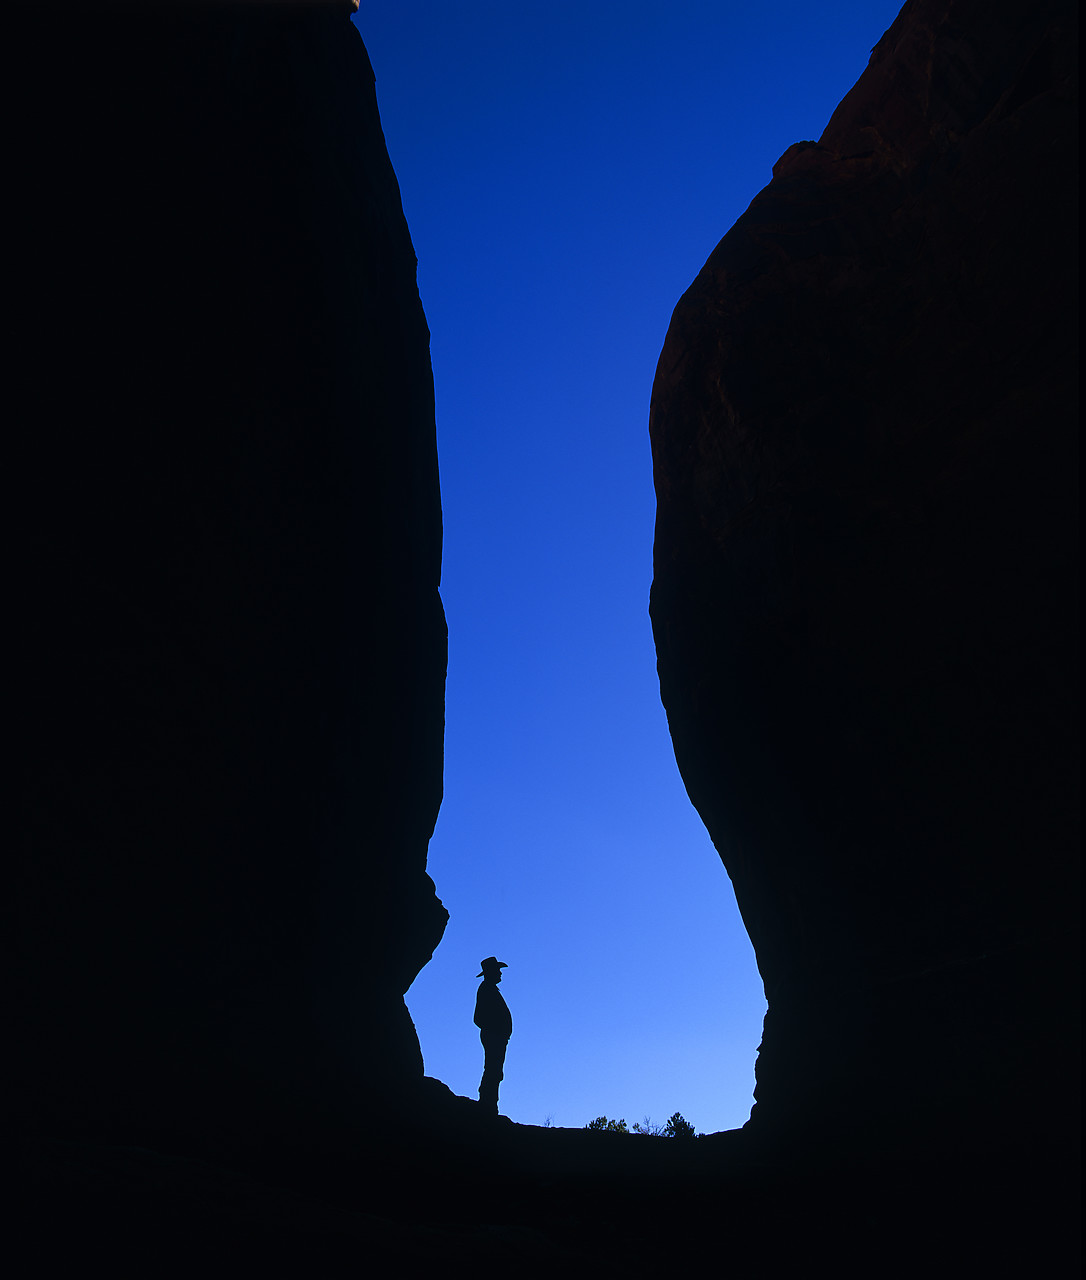 #010740-3 - Silhouette of Cowboy, Mystery Valley, Monument Valley, Arizona, USA